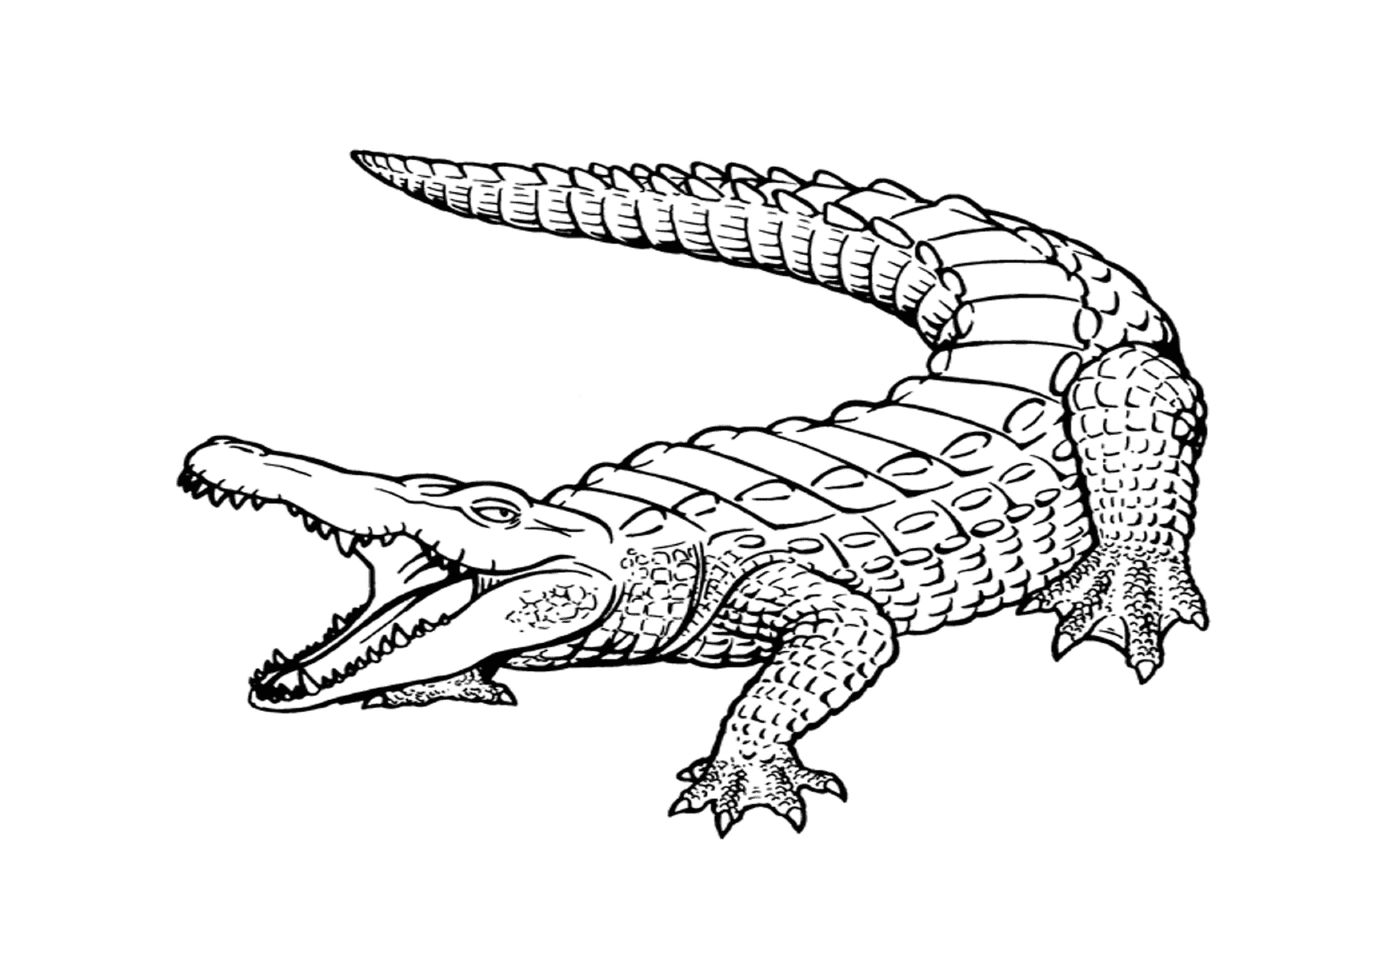  A realistic marine crocodile with an open mouth 